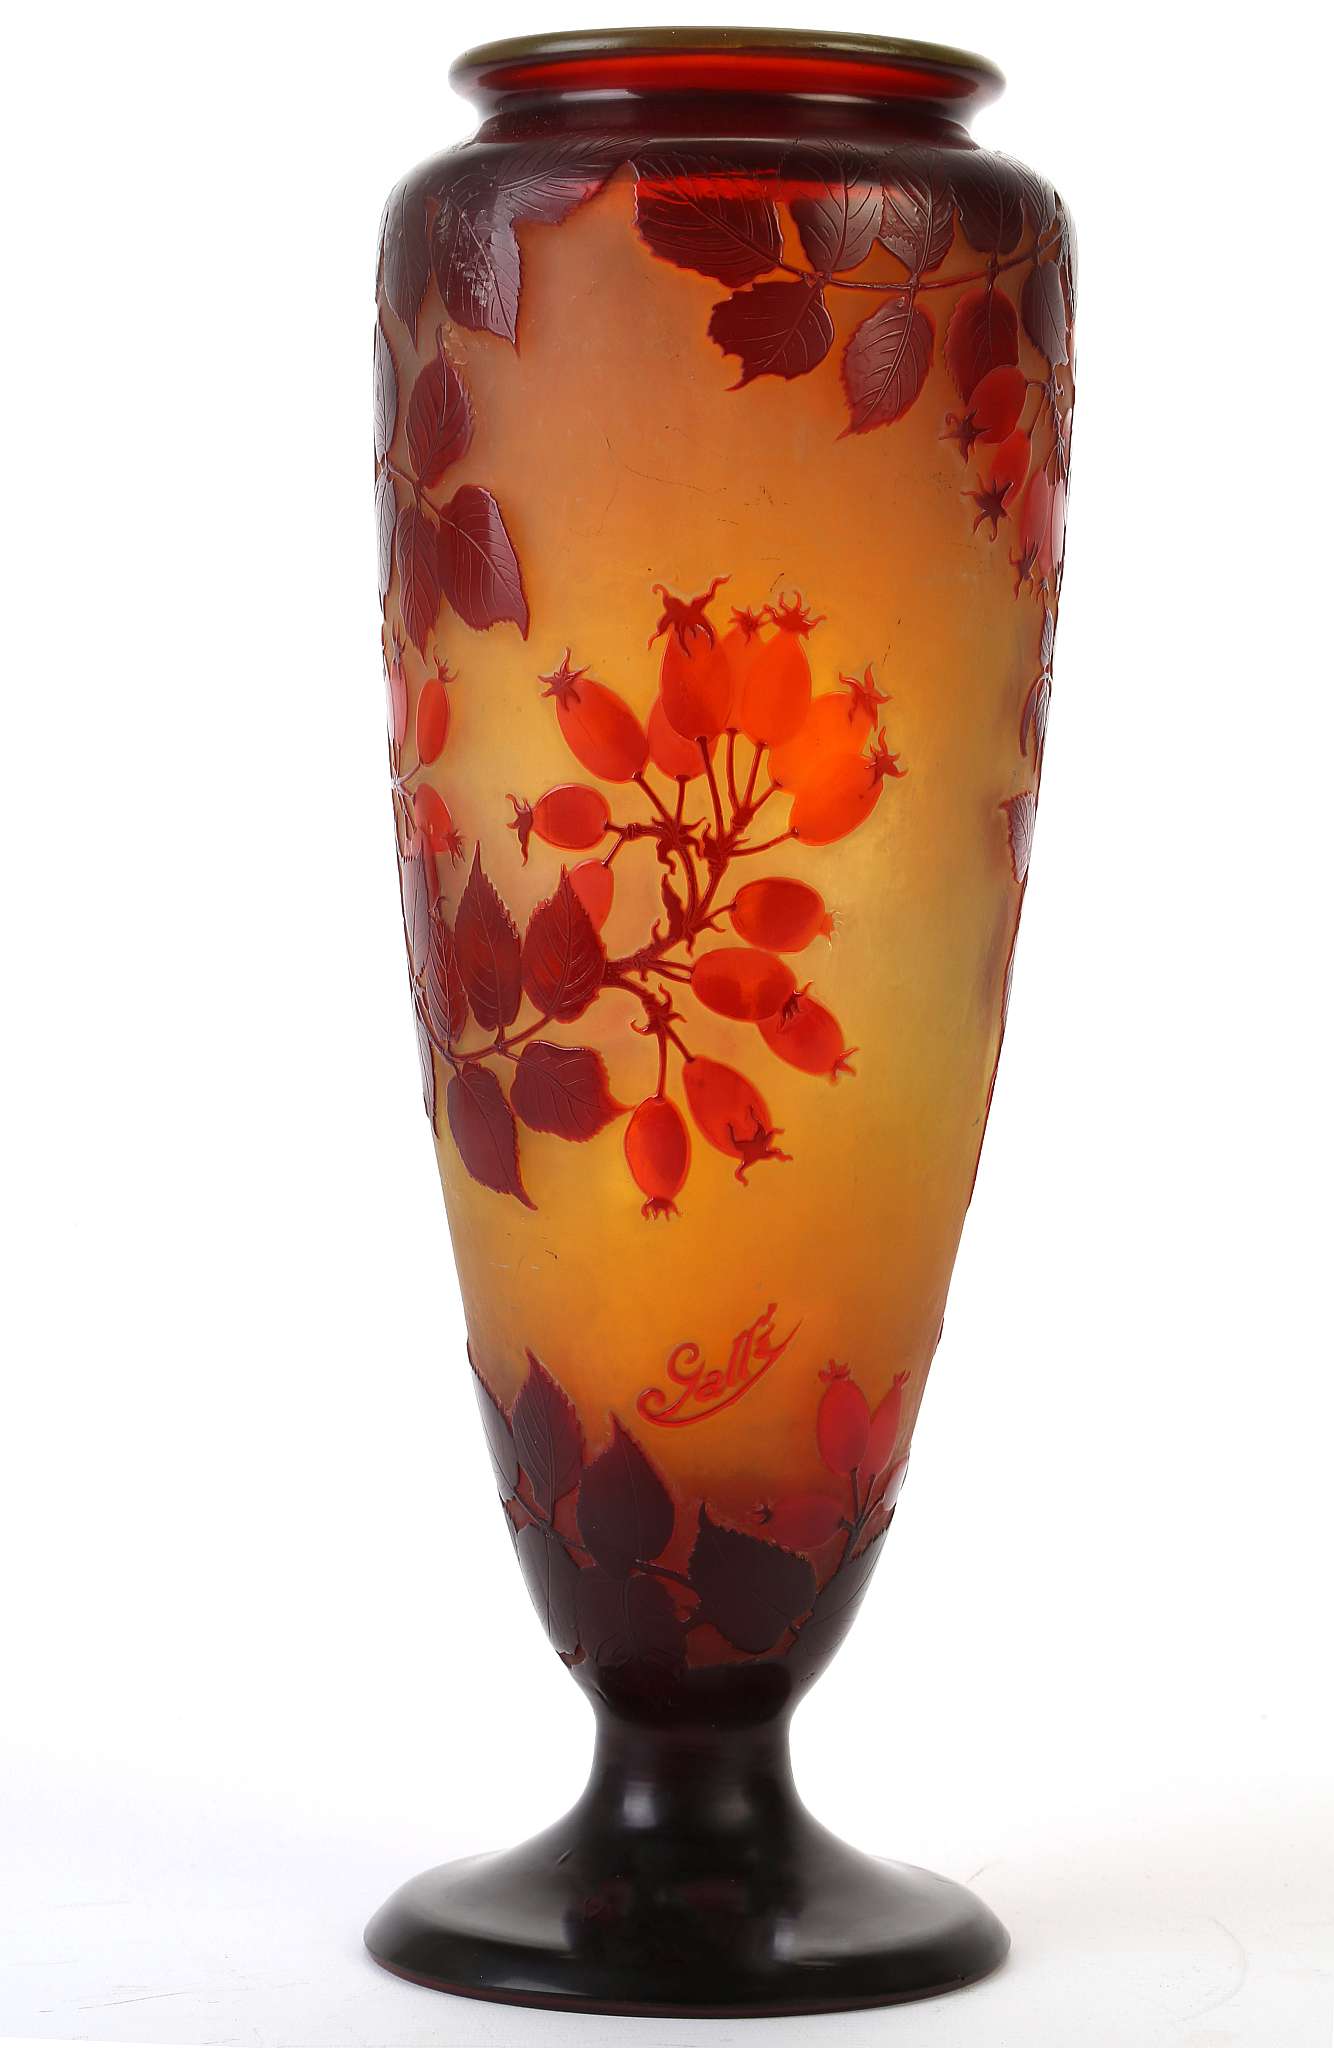 EMILE GALLE, FRANCE, a tall cameo glass vase, circa 1900, with frosted yellow body overlaid in red - Image 5 of 6